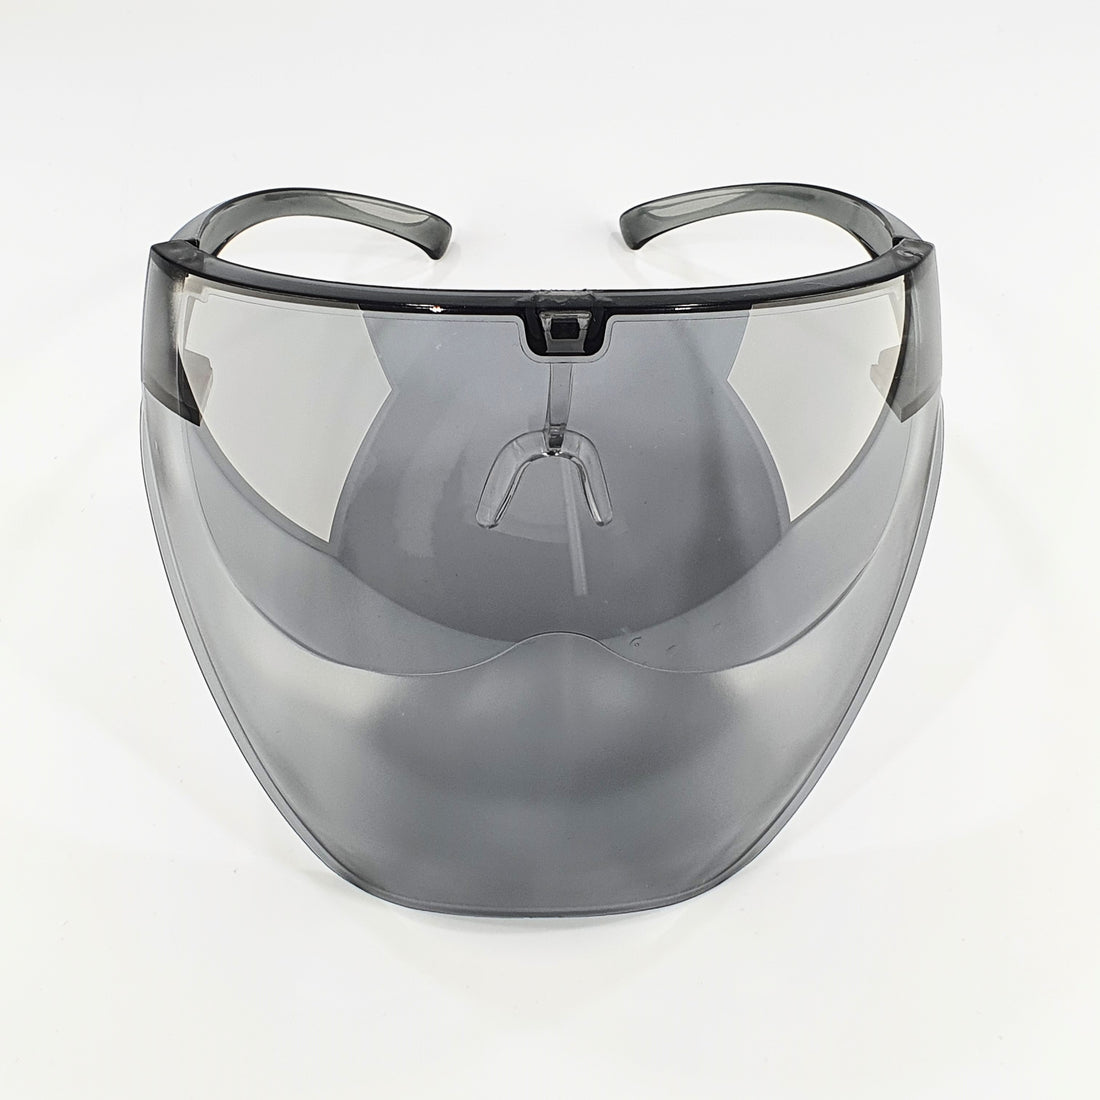 Safety Glasses X Face Shield - Adult Size | Half Frost